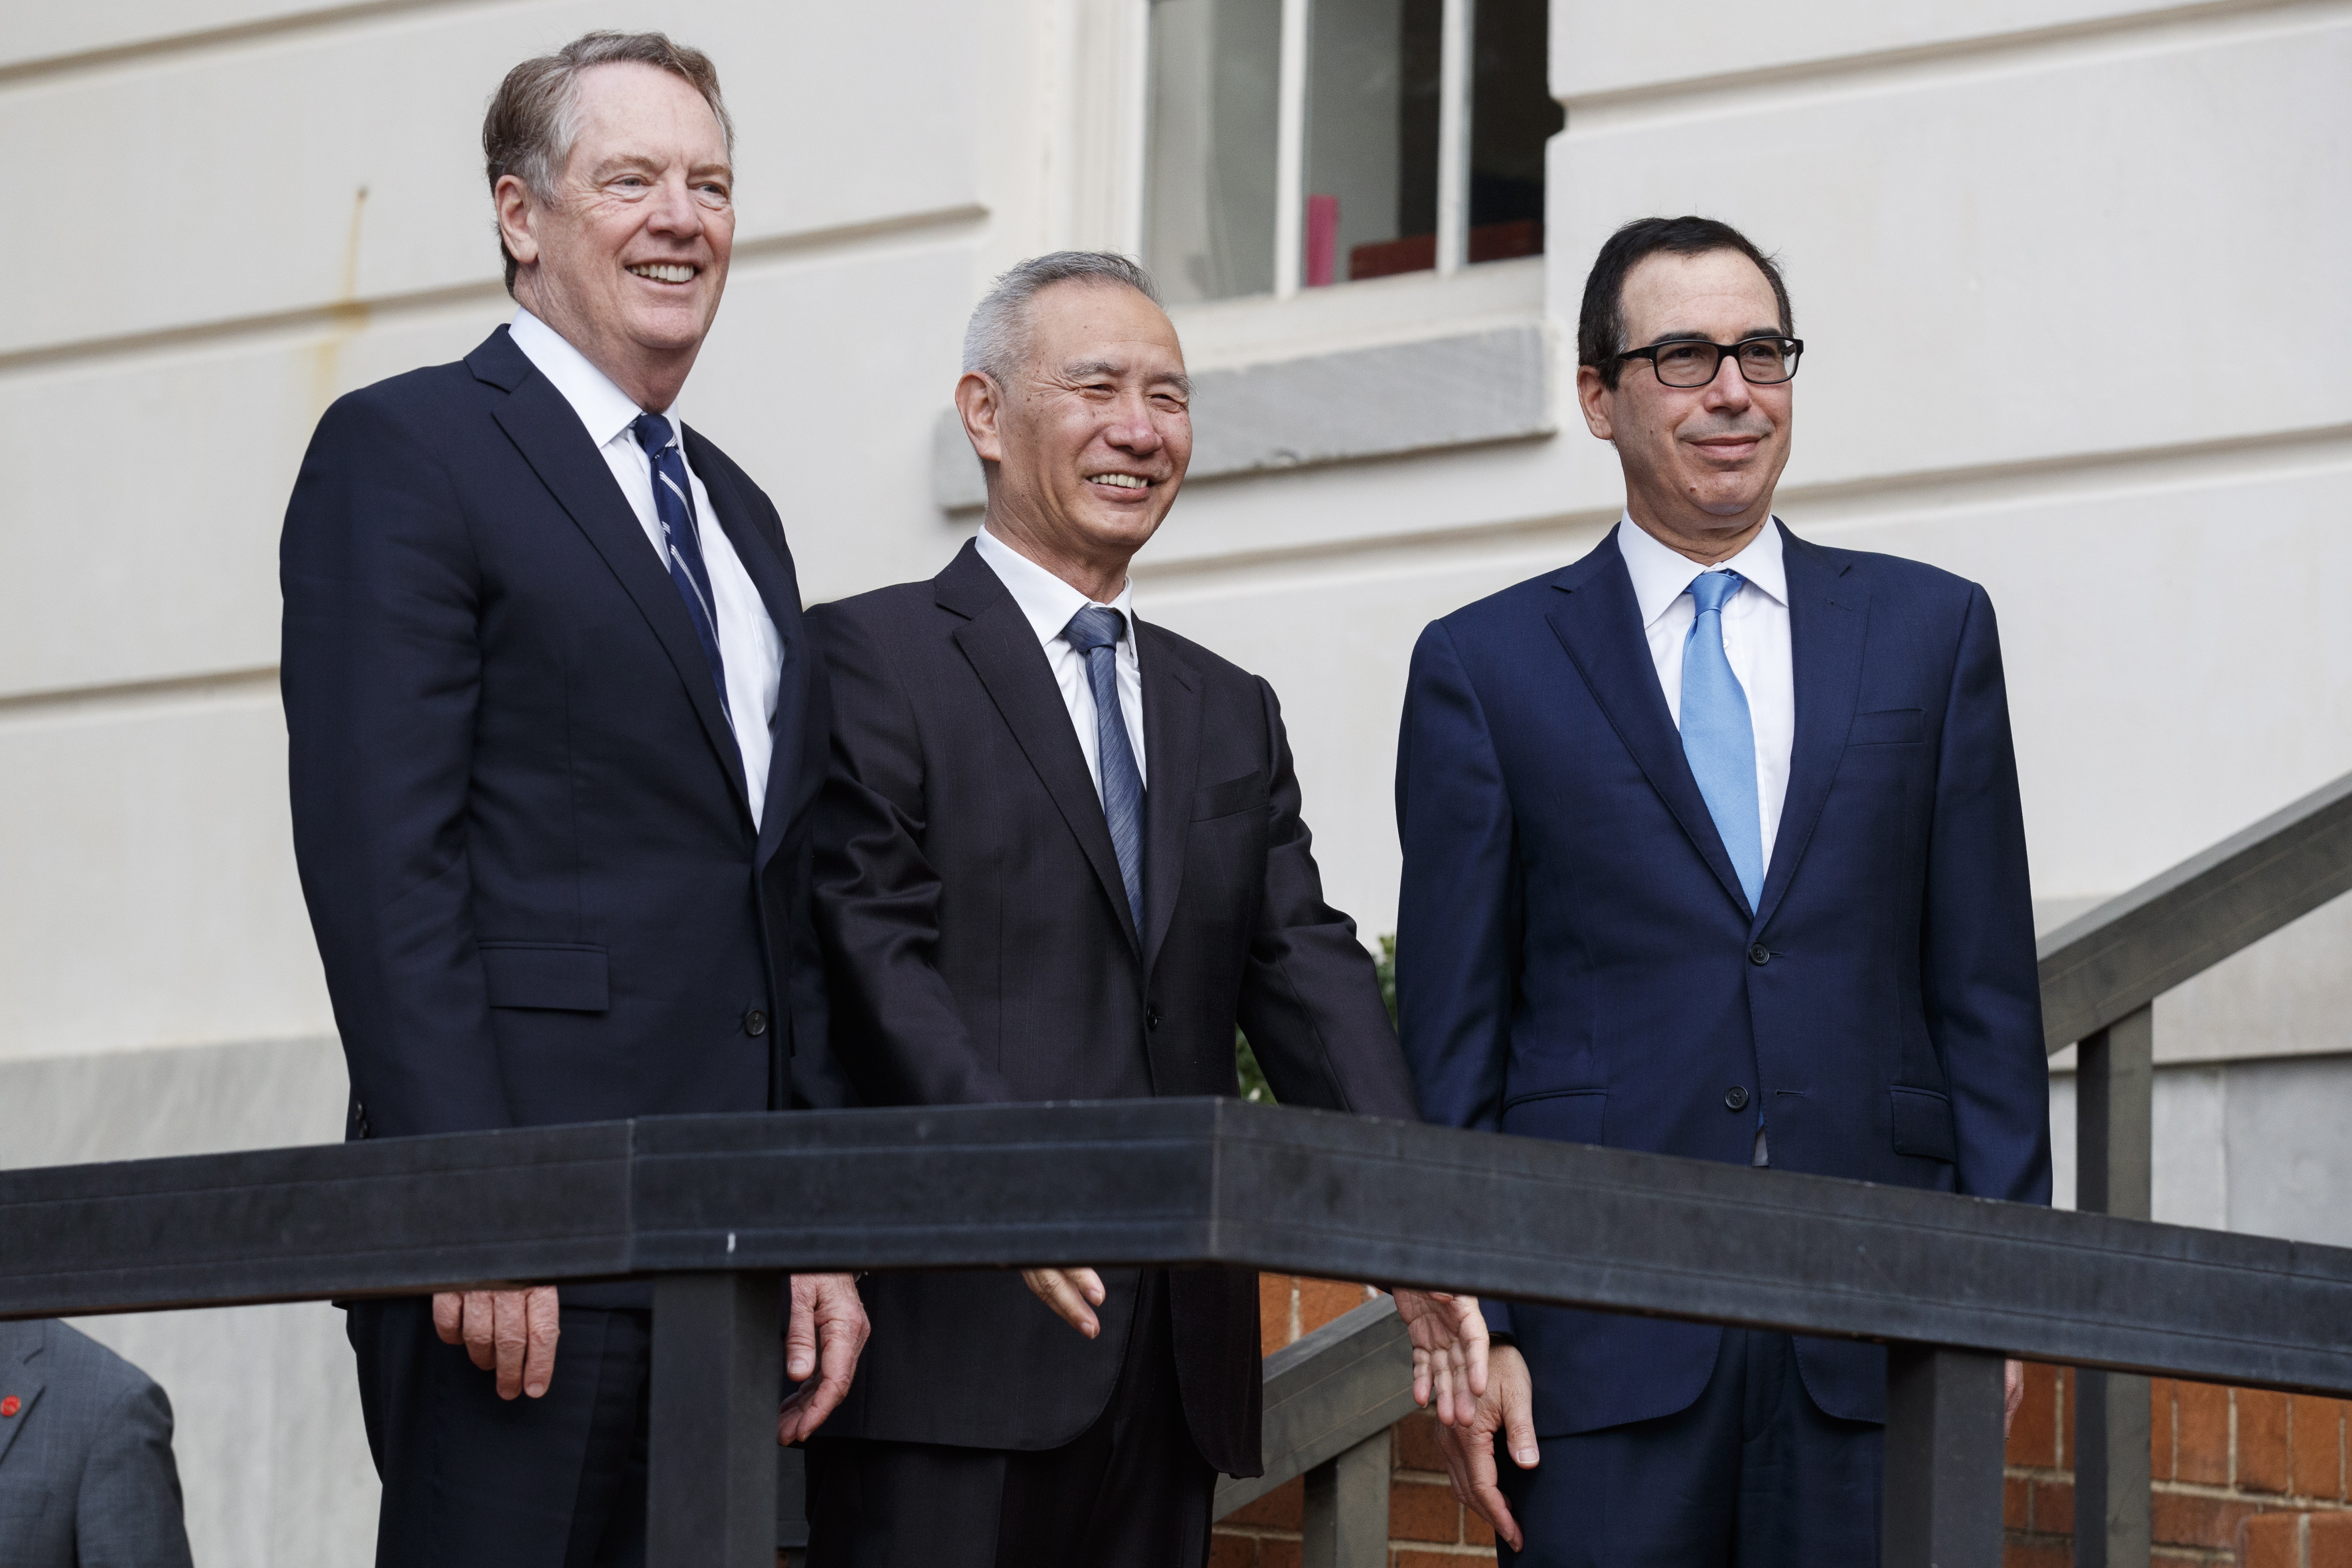 epa07910142 US Secretary of the Treasury Steven Mnuchin (R) and US Trade Representative Robert Lighthizer (L) greet Vice Premier of the People's Republic of China Liu He (C) prior to negotiations at the office of the US Trade Representative in Washington, DC, USA, 10 October 2019. The two nations' top trade negotiators are meeting for the first time since July and are attempting to negotiate an end to the US China trade war.  EPA/SHAWN THEW